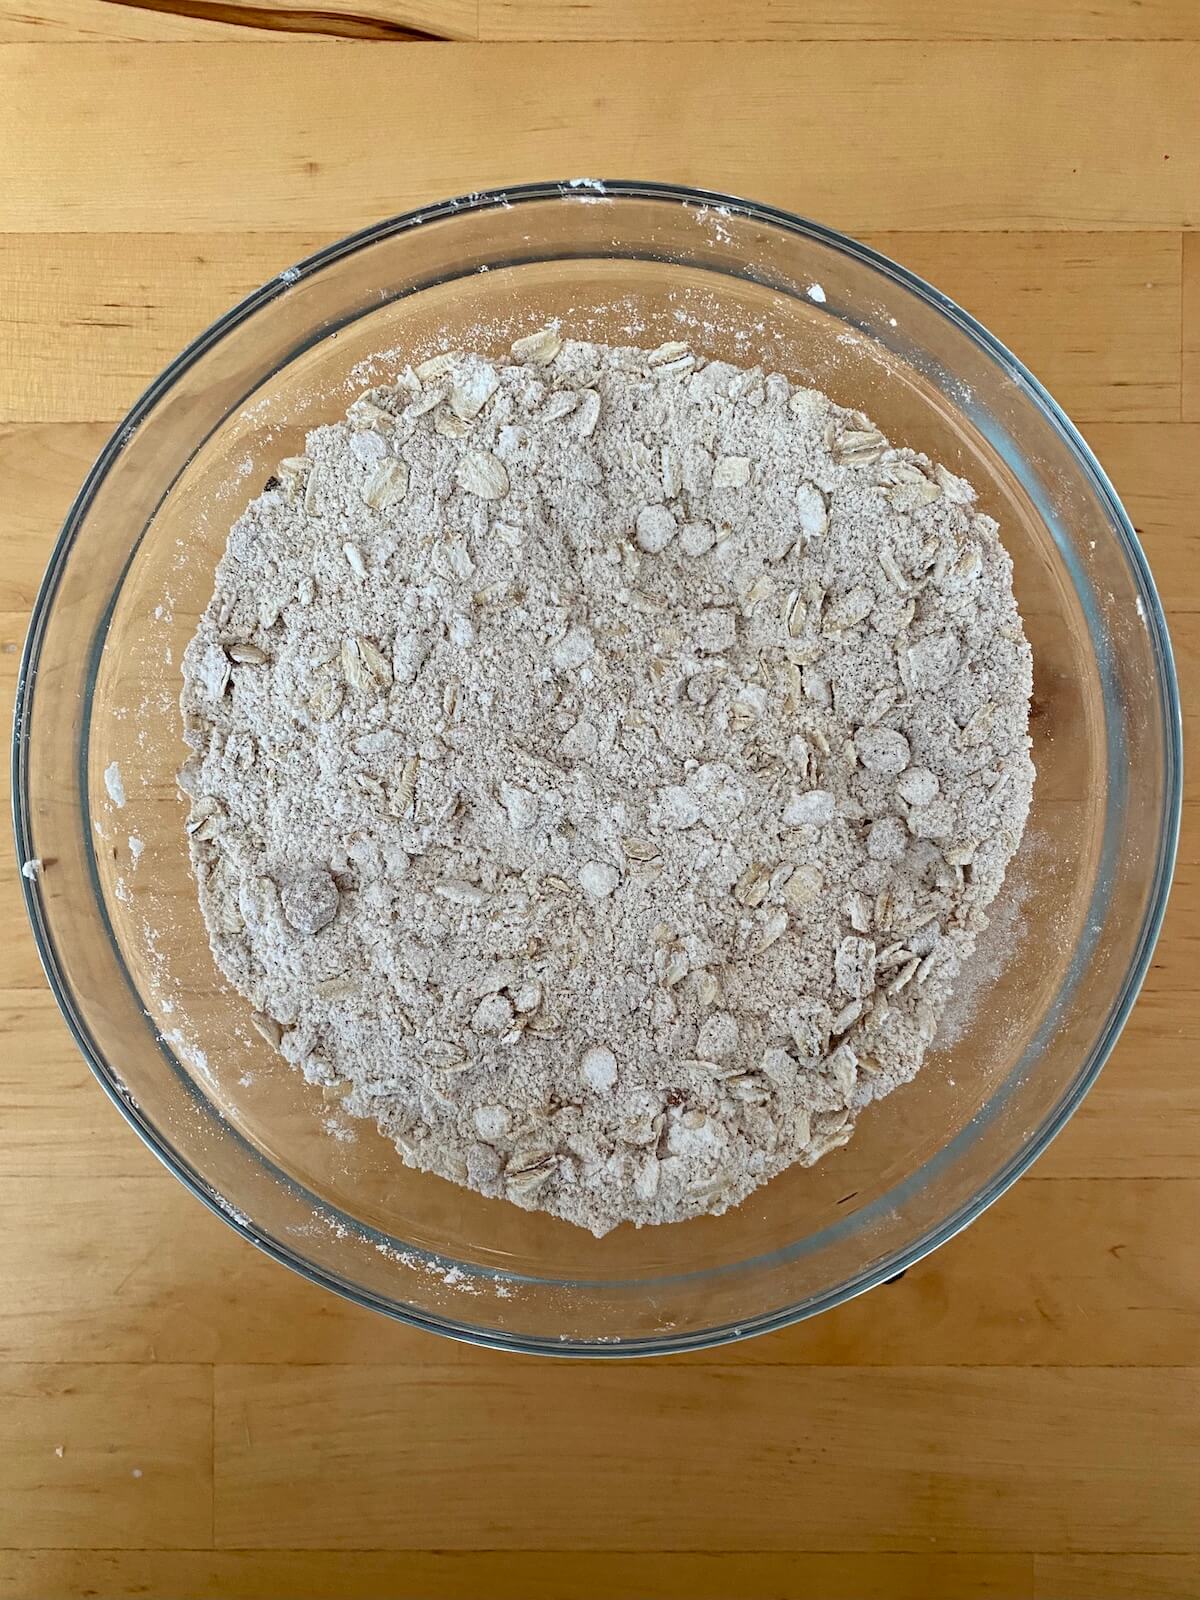 A clear glass bowl filled with the dry ingredients to make the oat streusel crumble.